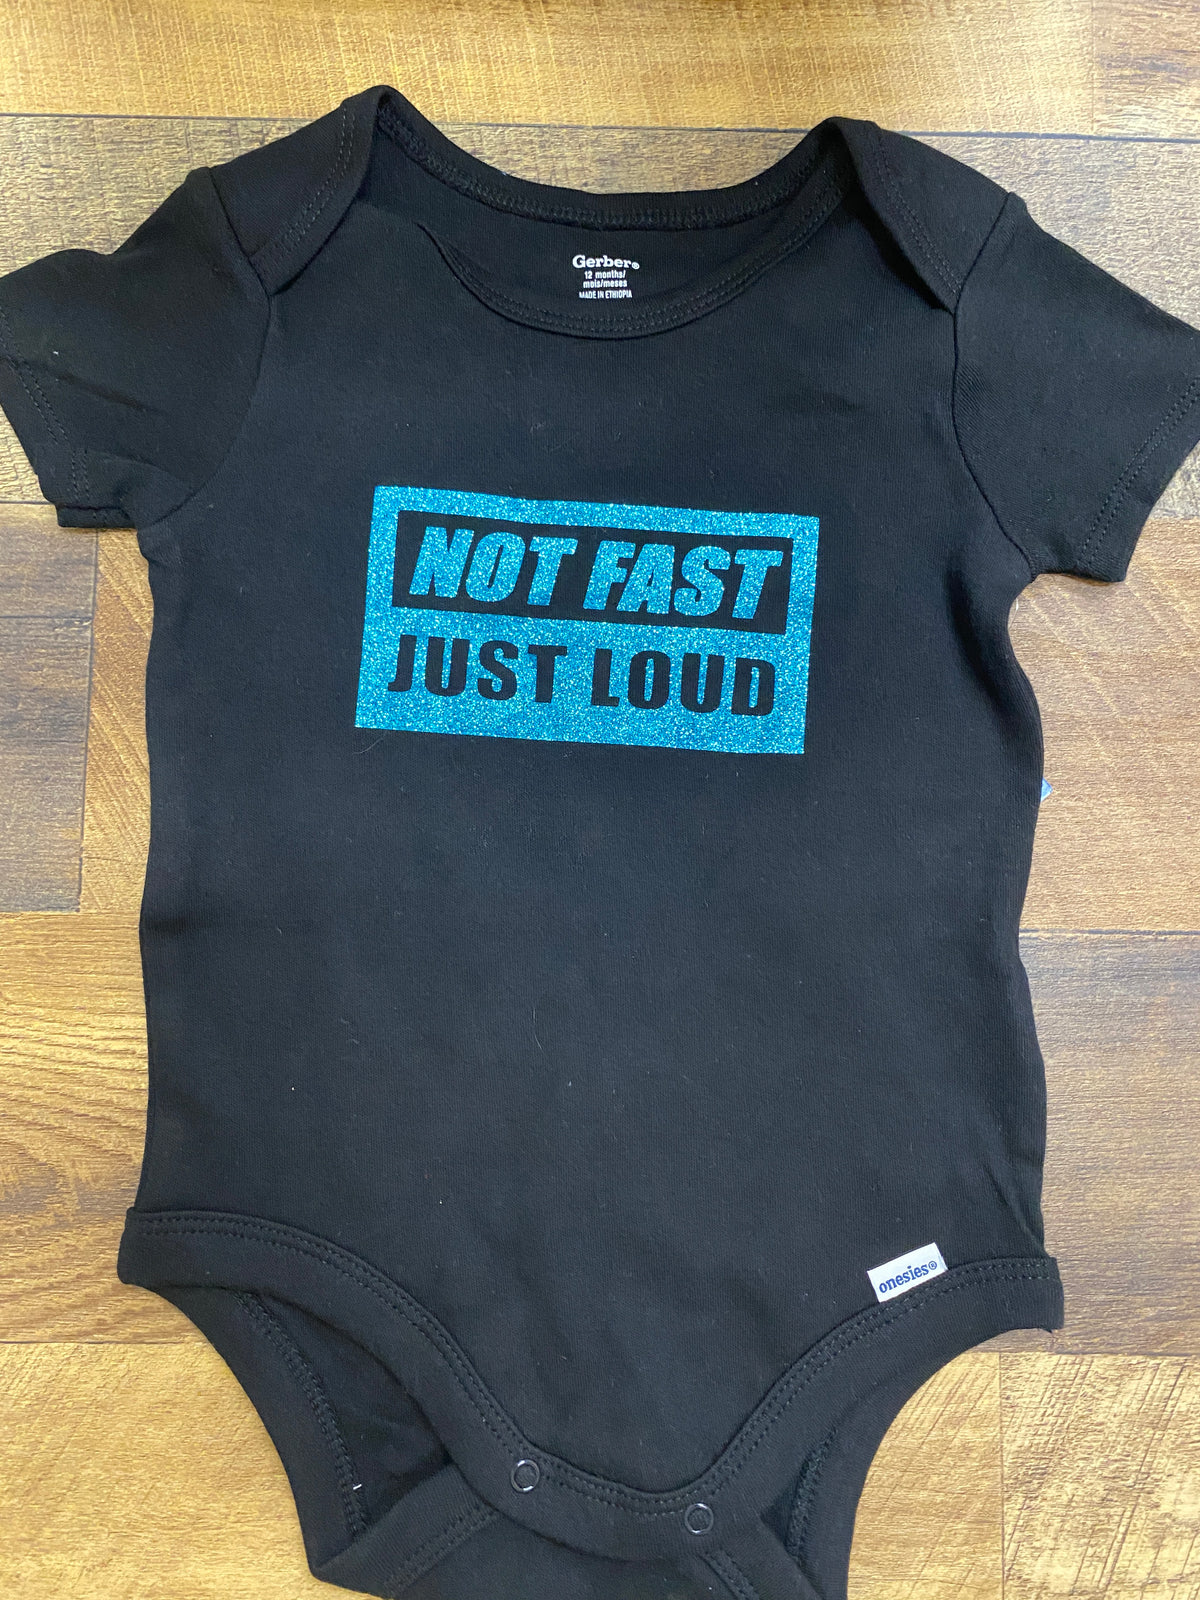 Not Fast Just Loud kid's shirt